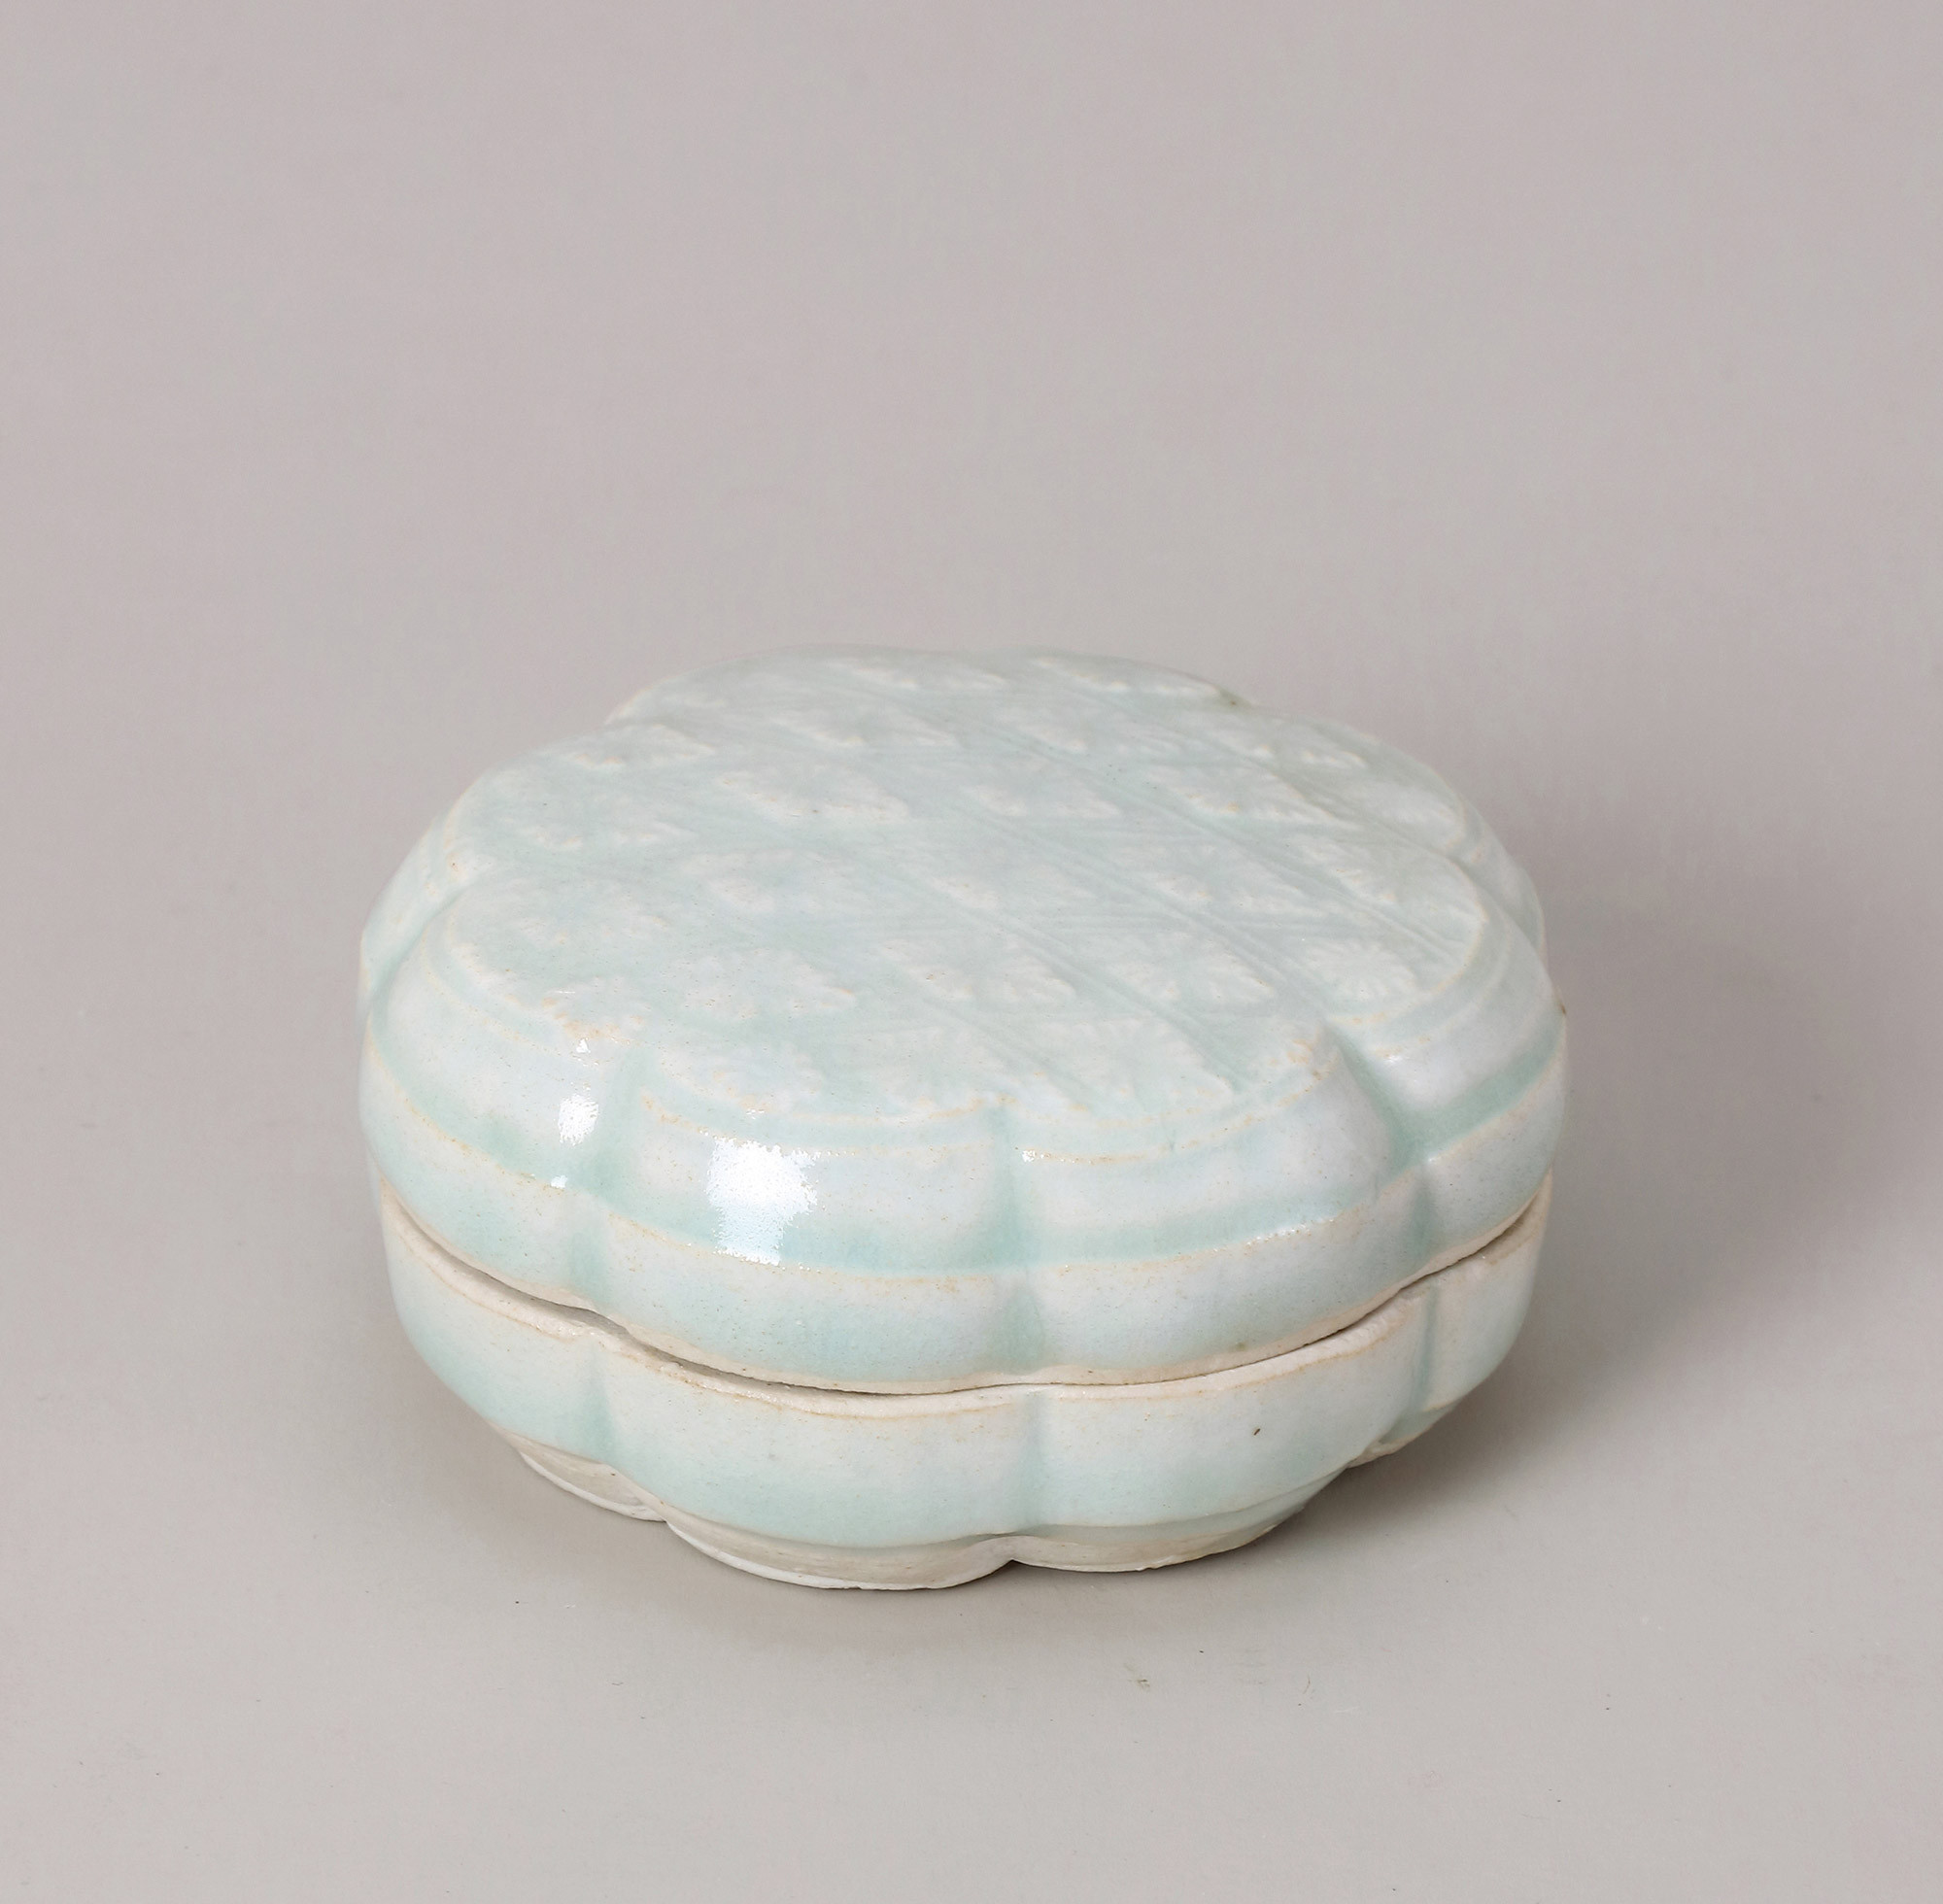 A SHADOWY-BLUE GLAZED BOX AND COVER WITH MOULDED‘FLORAL’